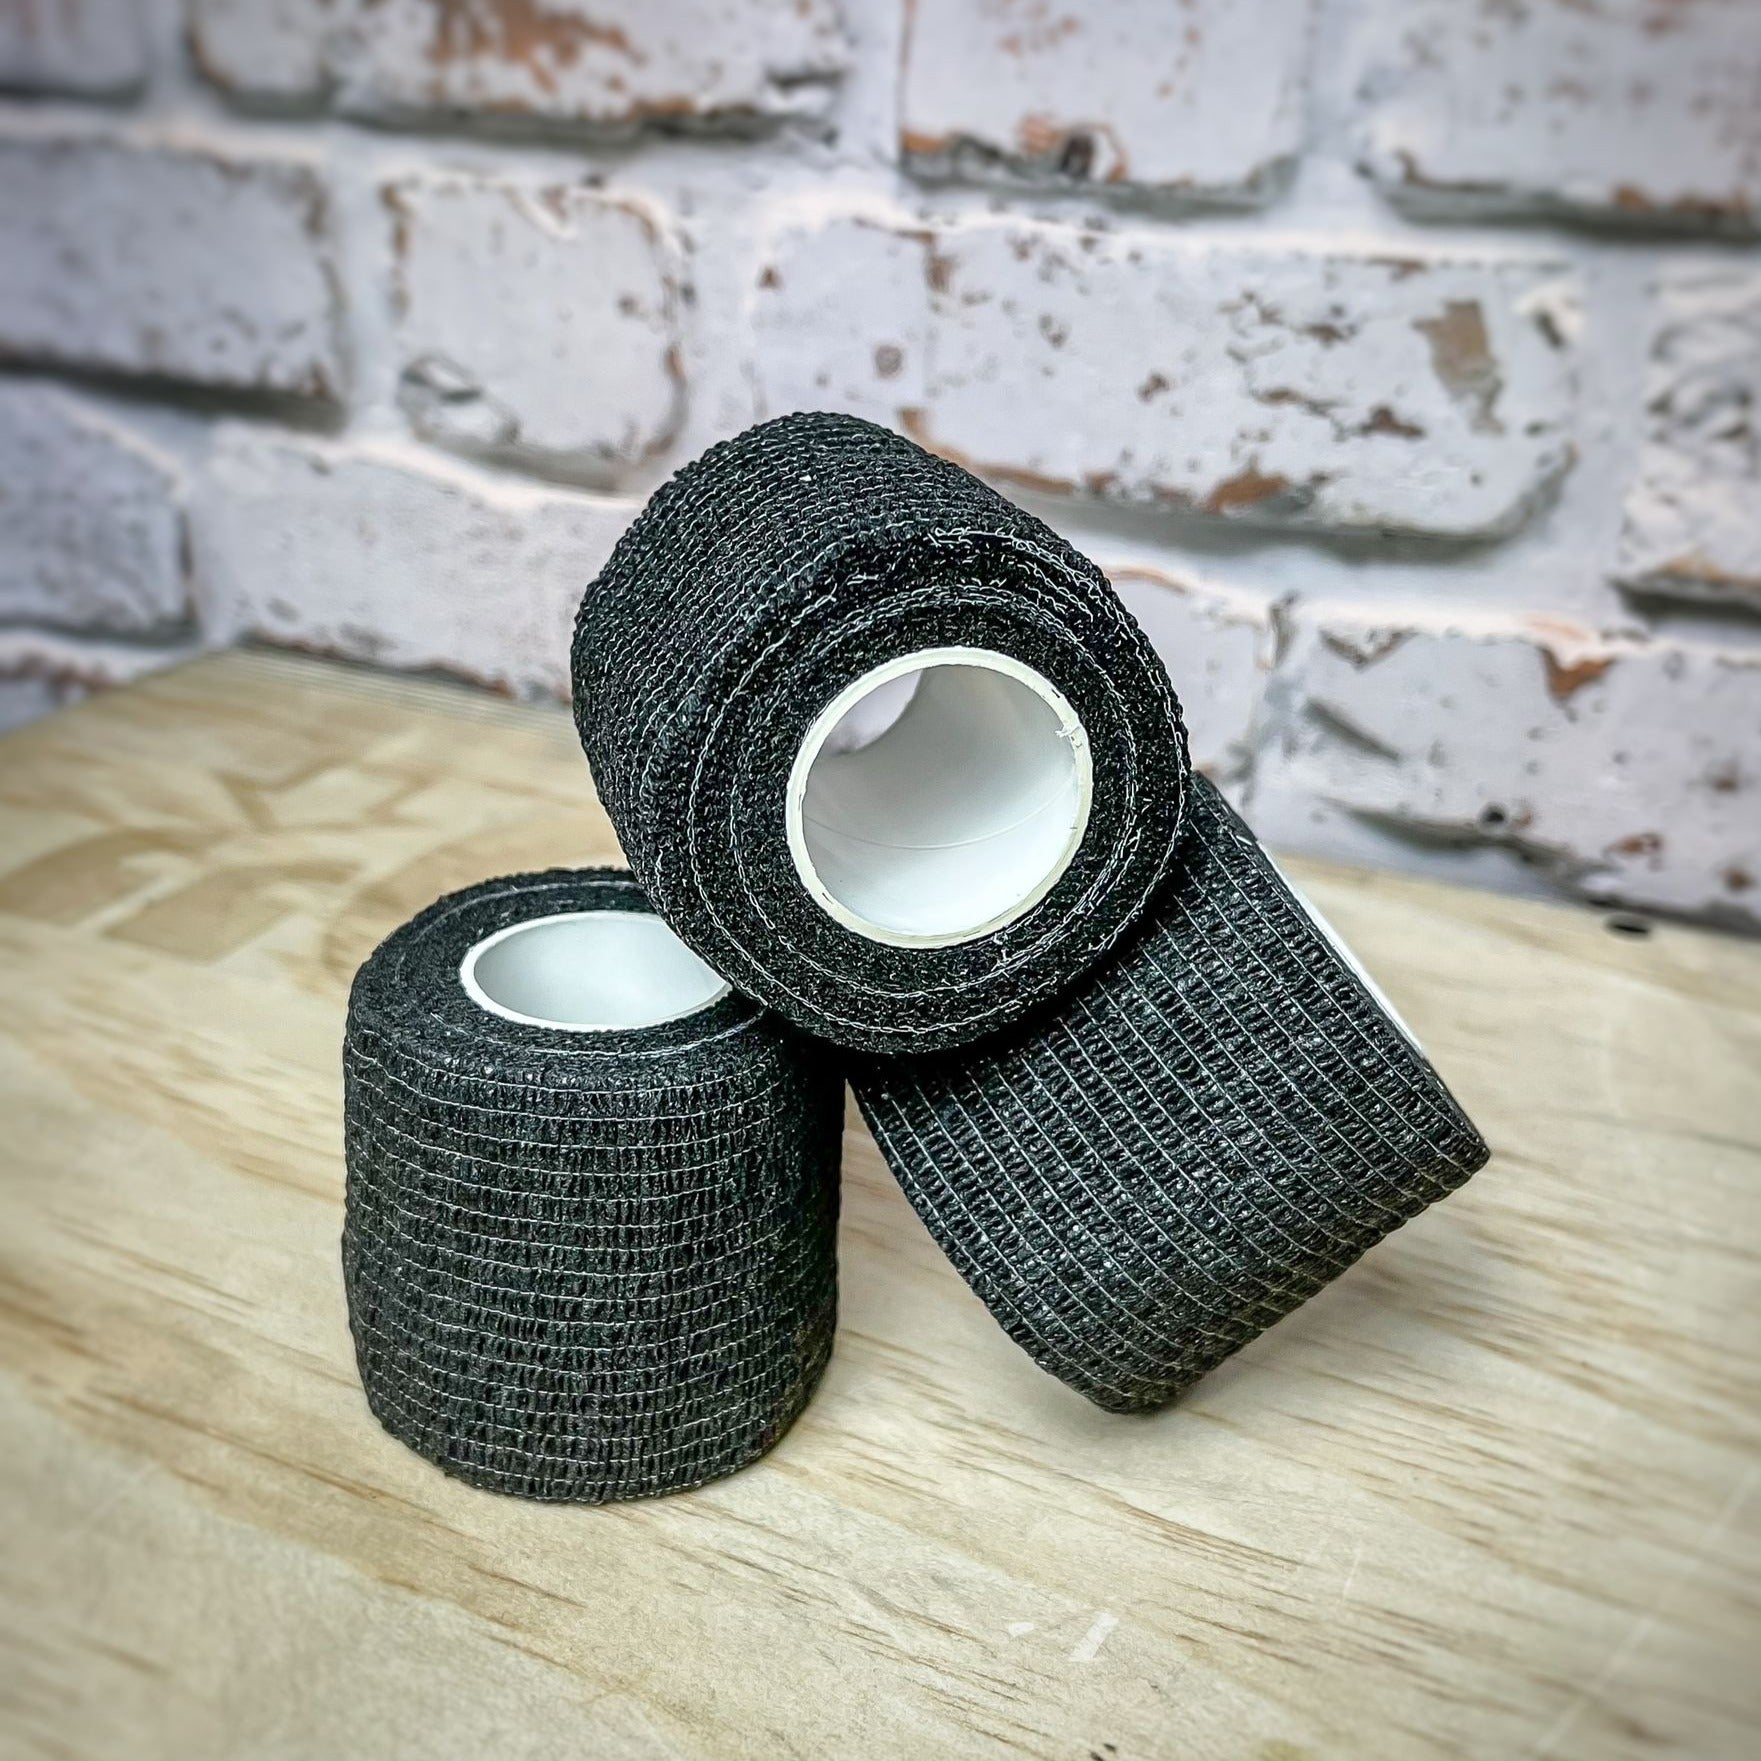 Weightlifting Thumb Tape – NoRepGear